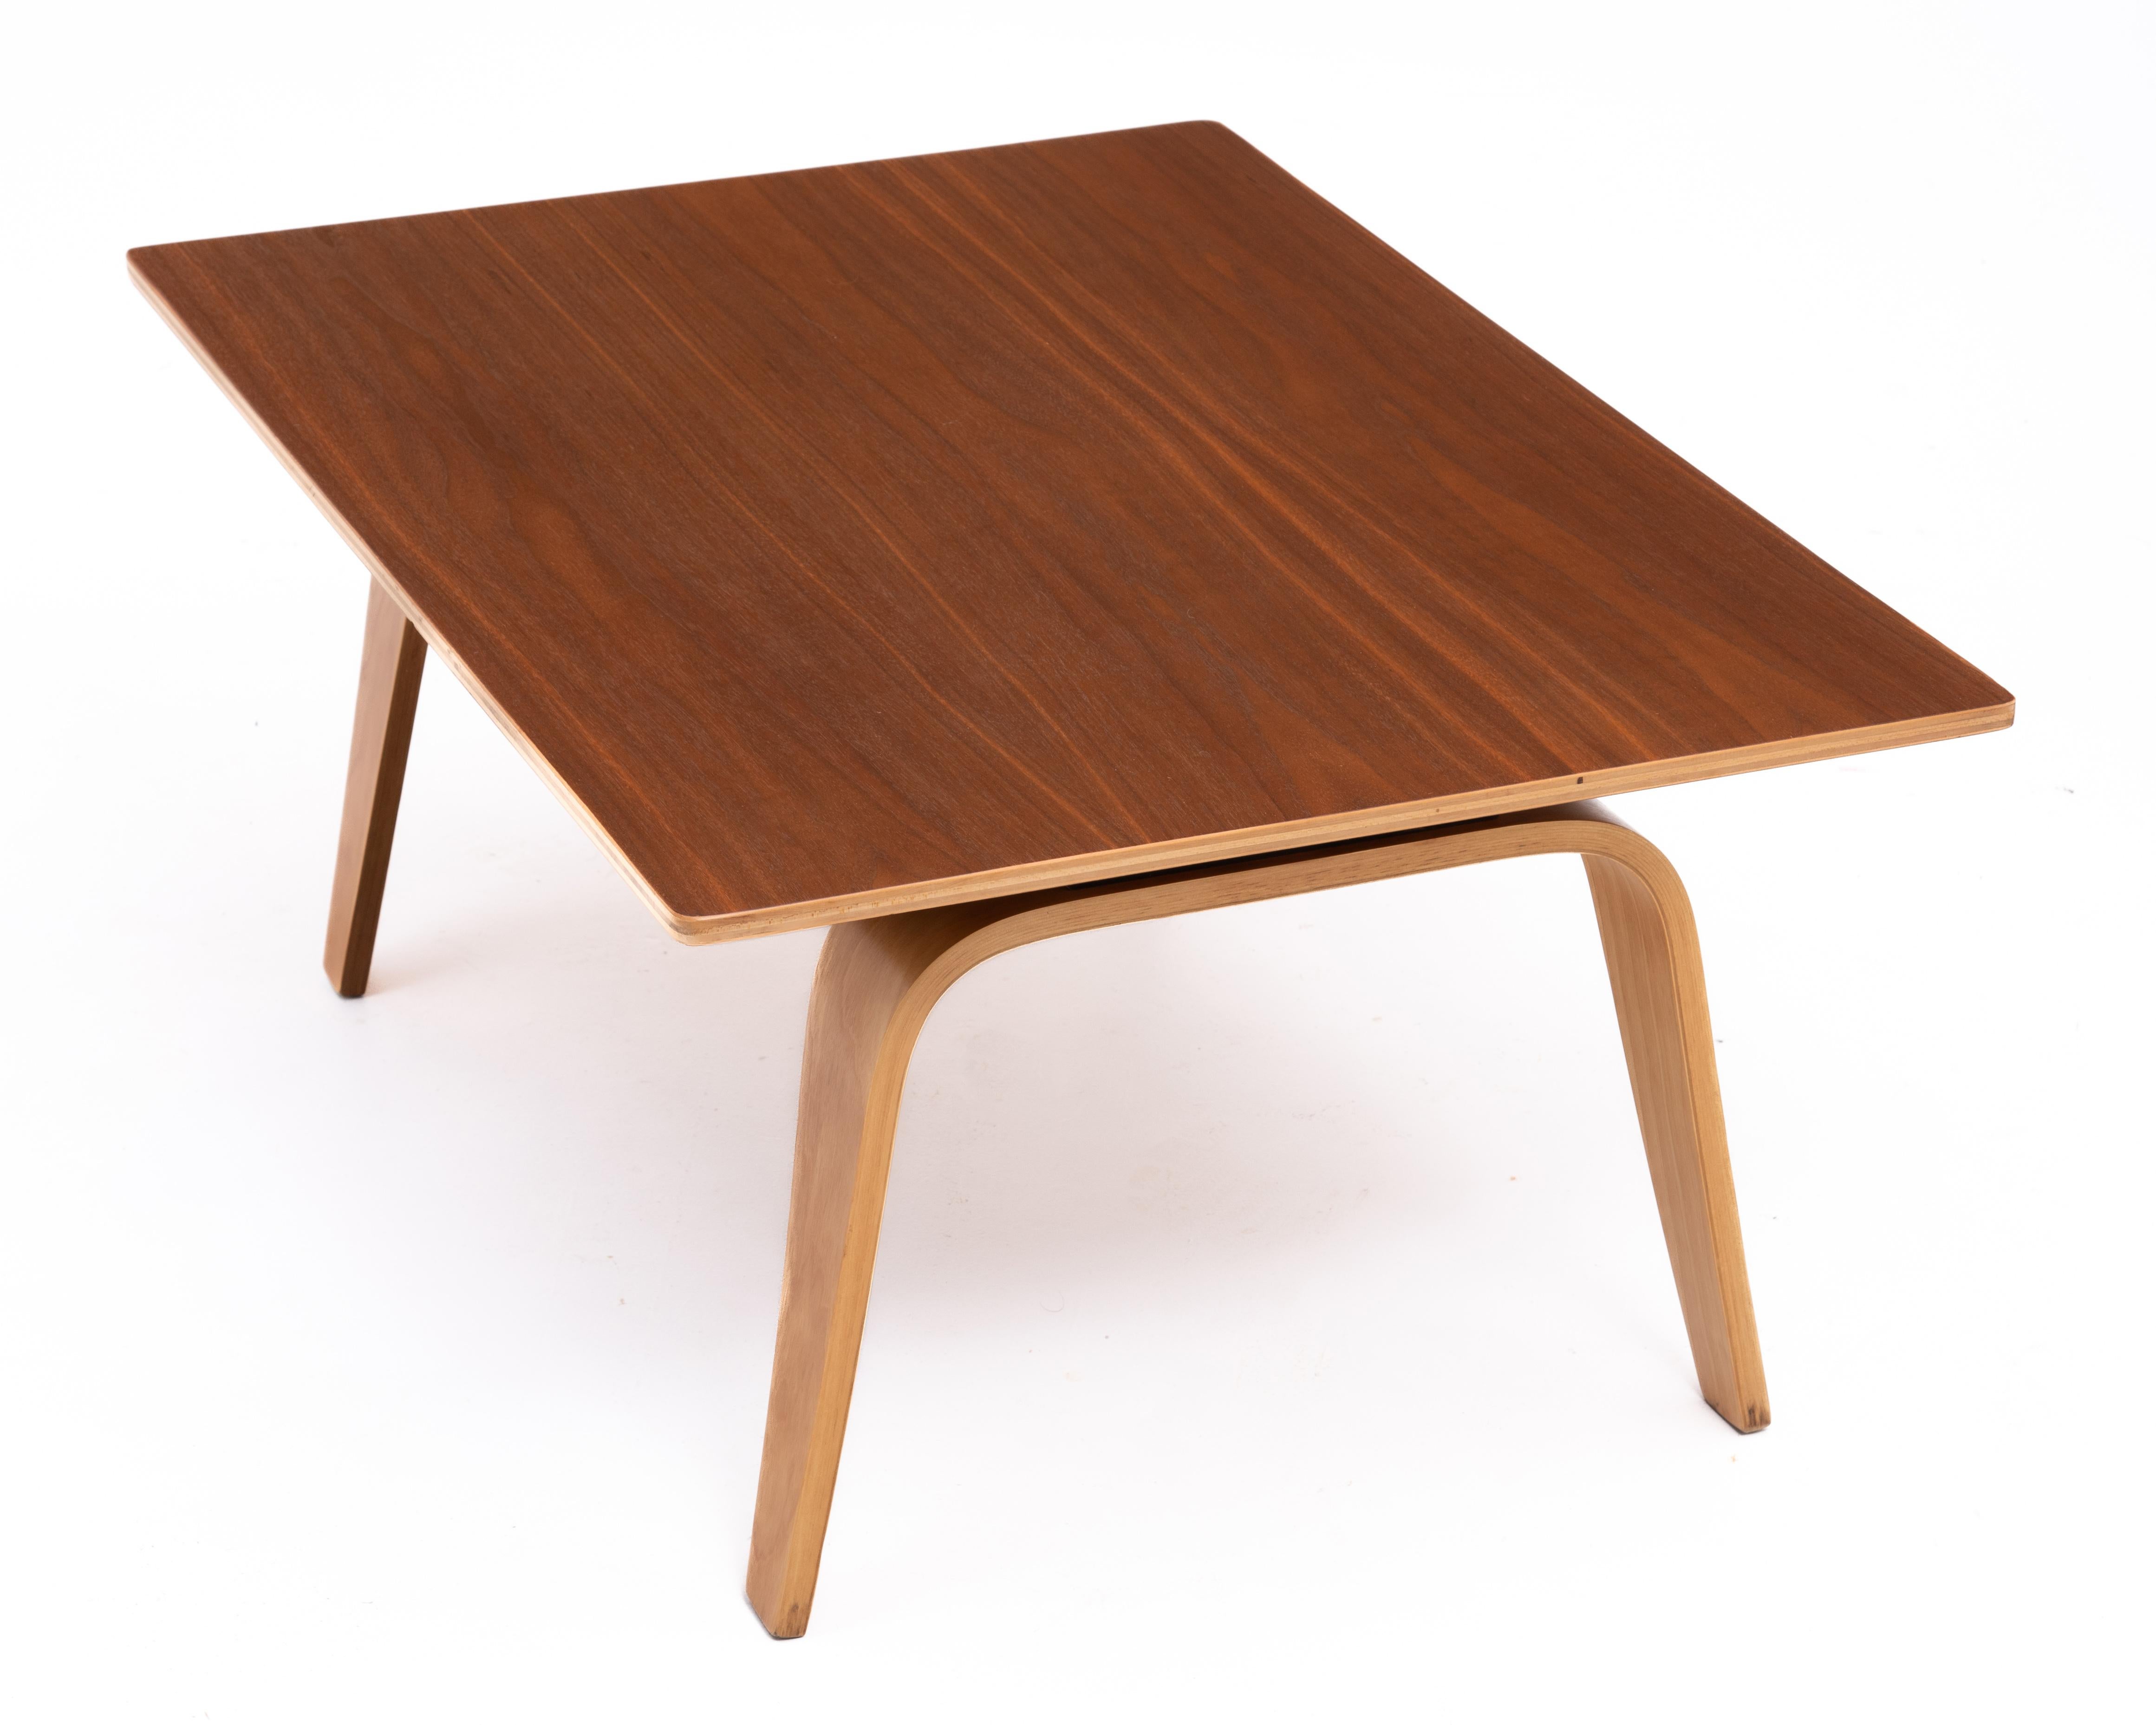 Charles Ray Eames Evans Plywood Company CTW1 OTW Oblong Table Wood Walnut Birch For Sale 1